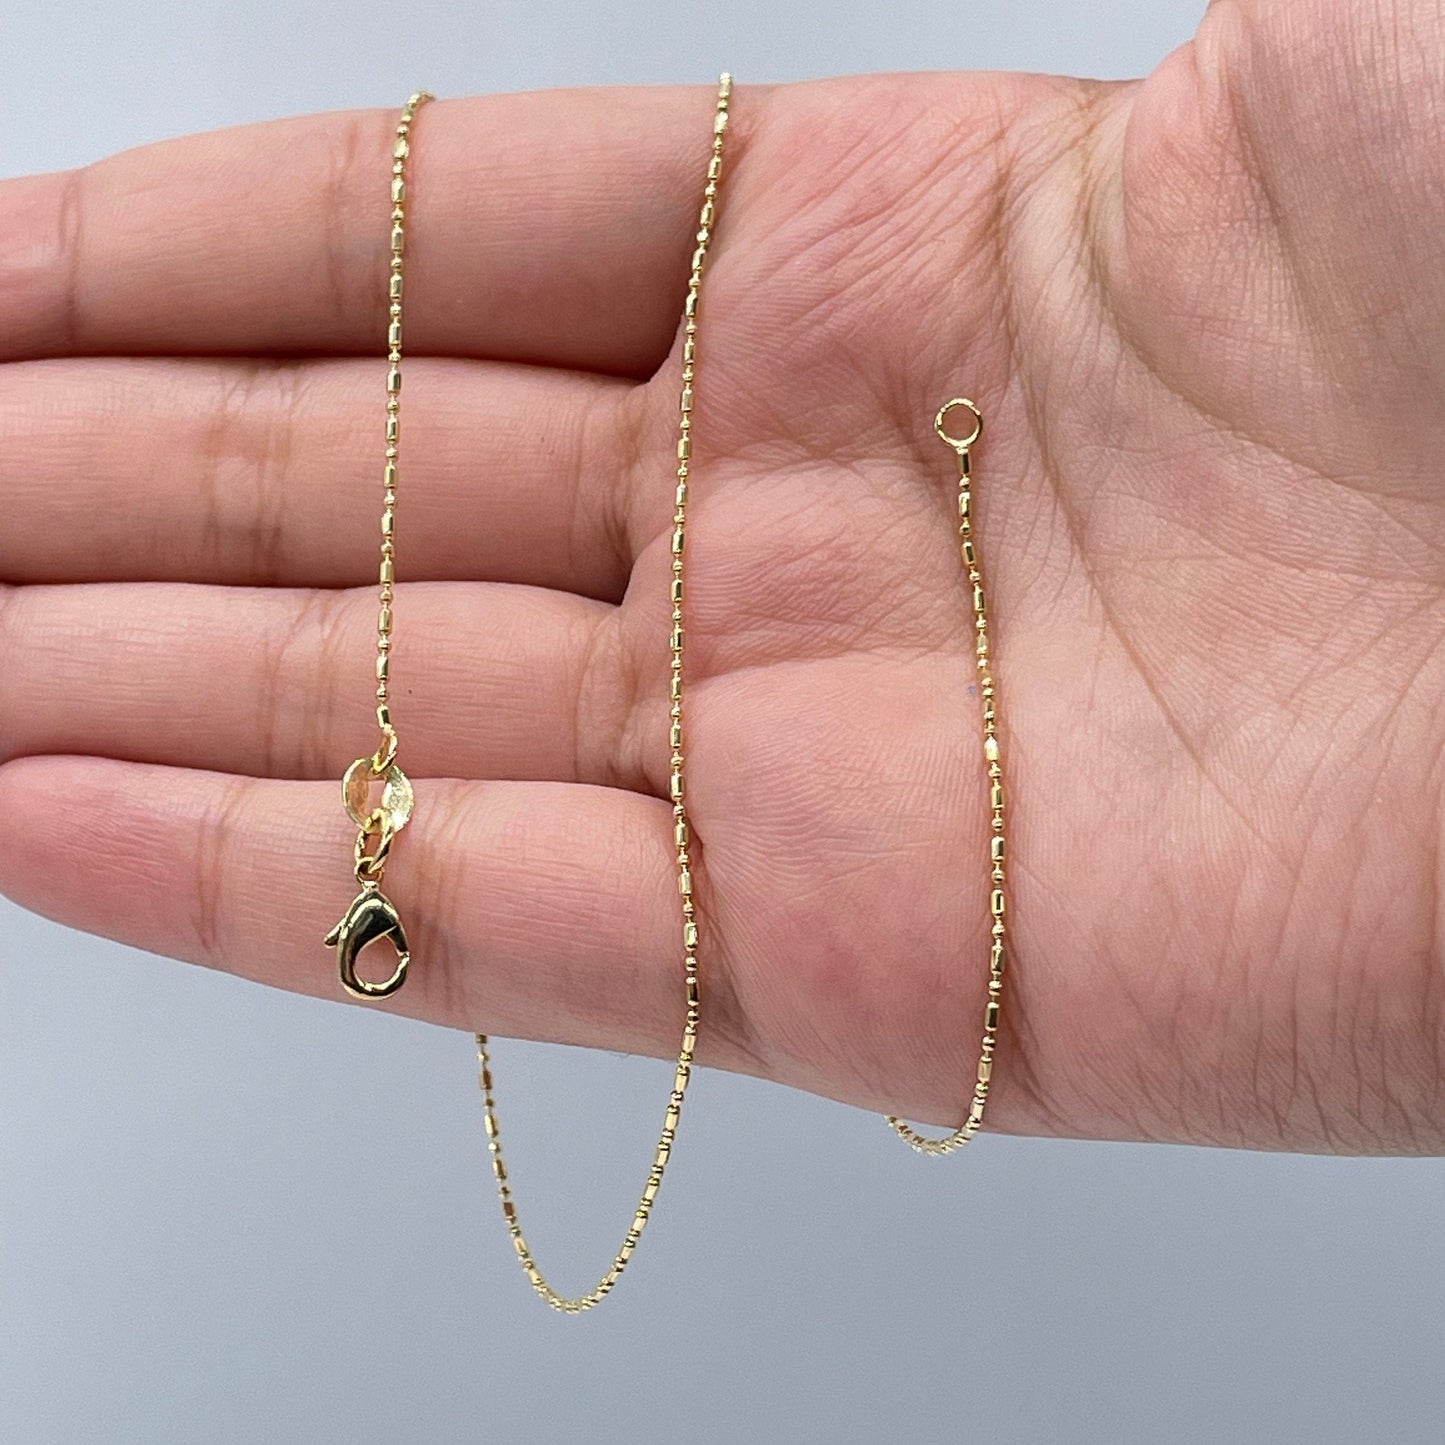 18k Gold Layered 1mm Extra Thin Dash Dot Chain For Wholesale And Jewelry Making